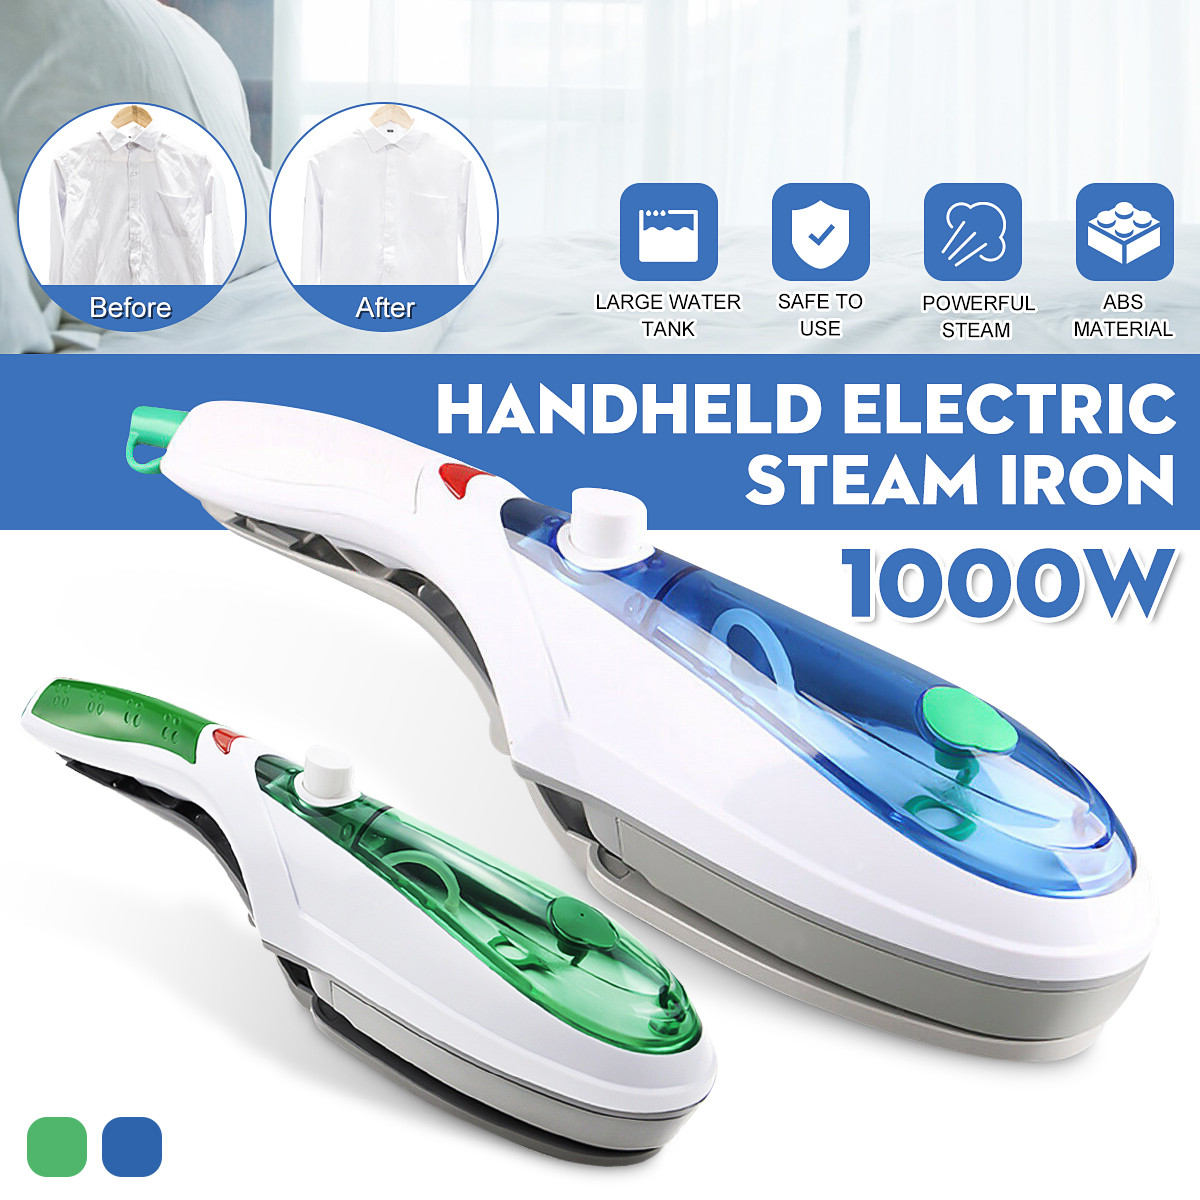 Protable-1000W-Electric-Steam-Iron-Handheld-Fabric-Laundry-Steamer-Brush-Travel-Soldering-Iron-Tips-1589841-1